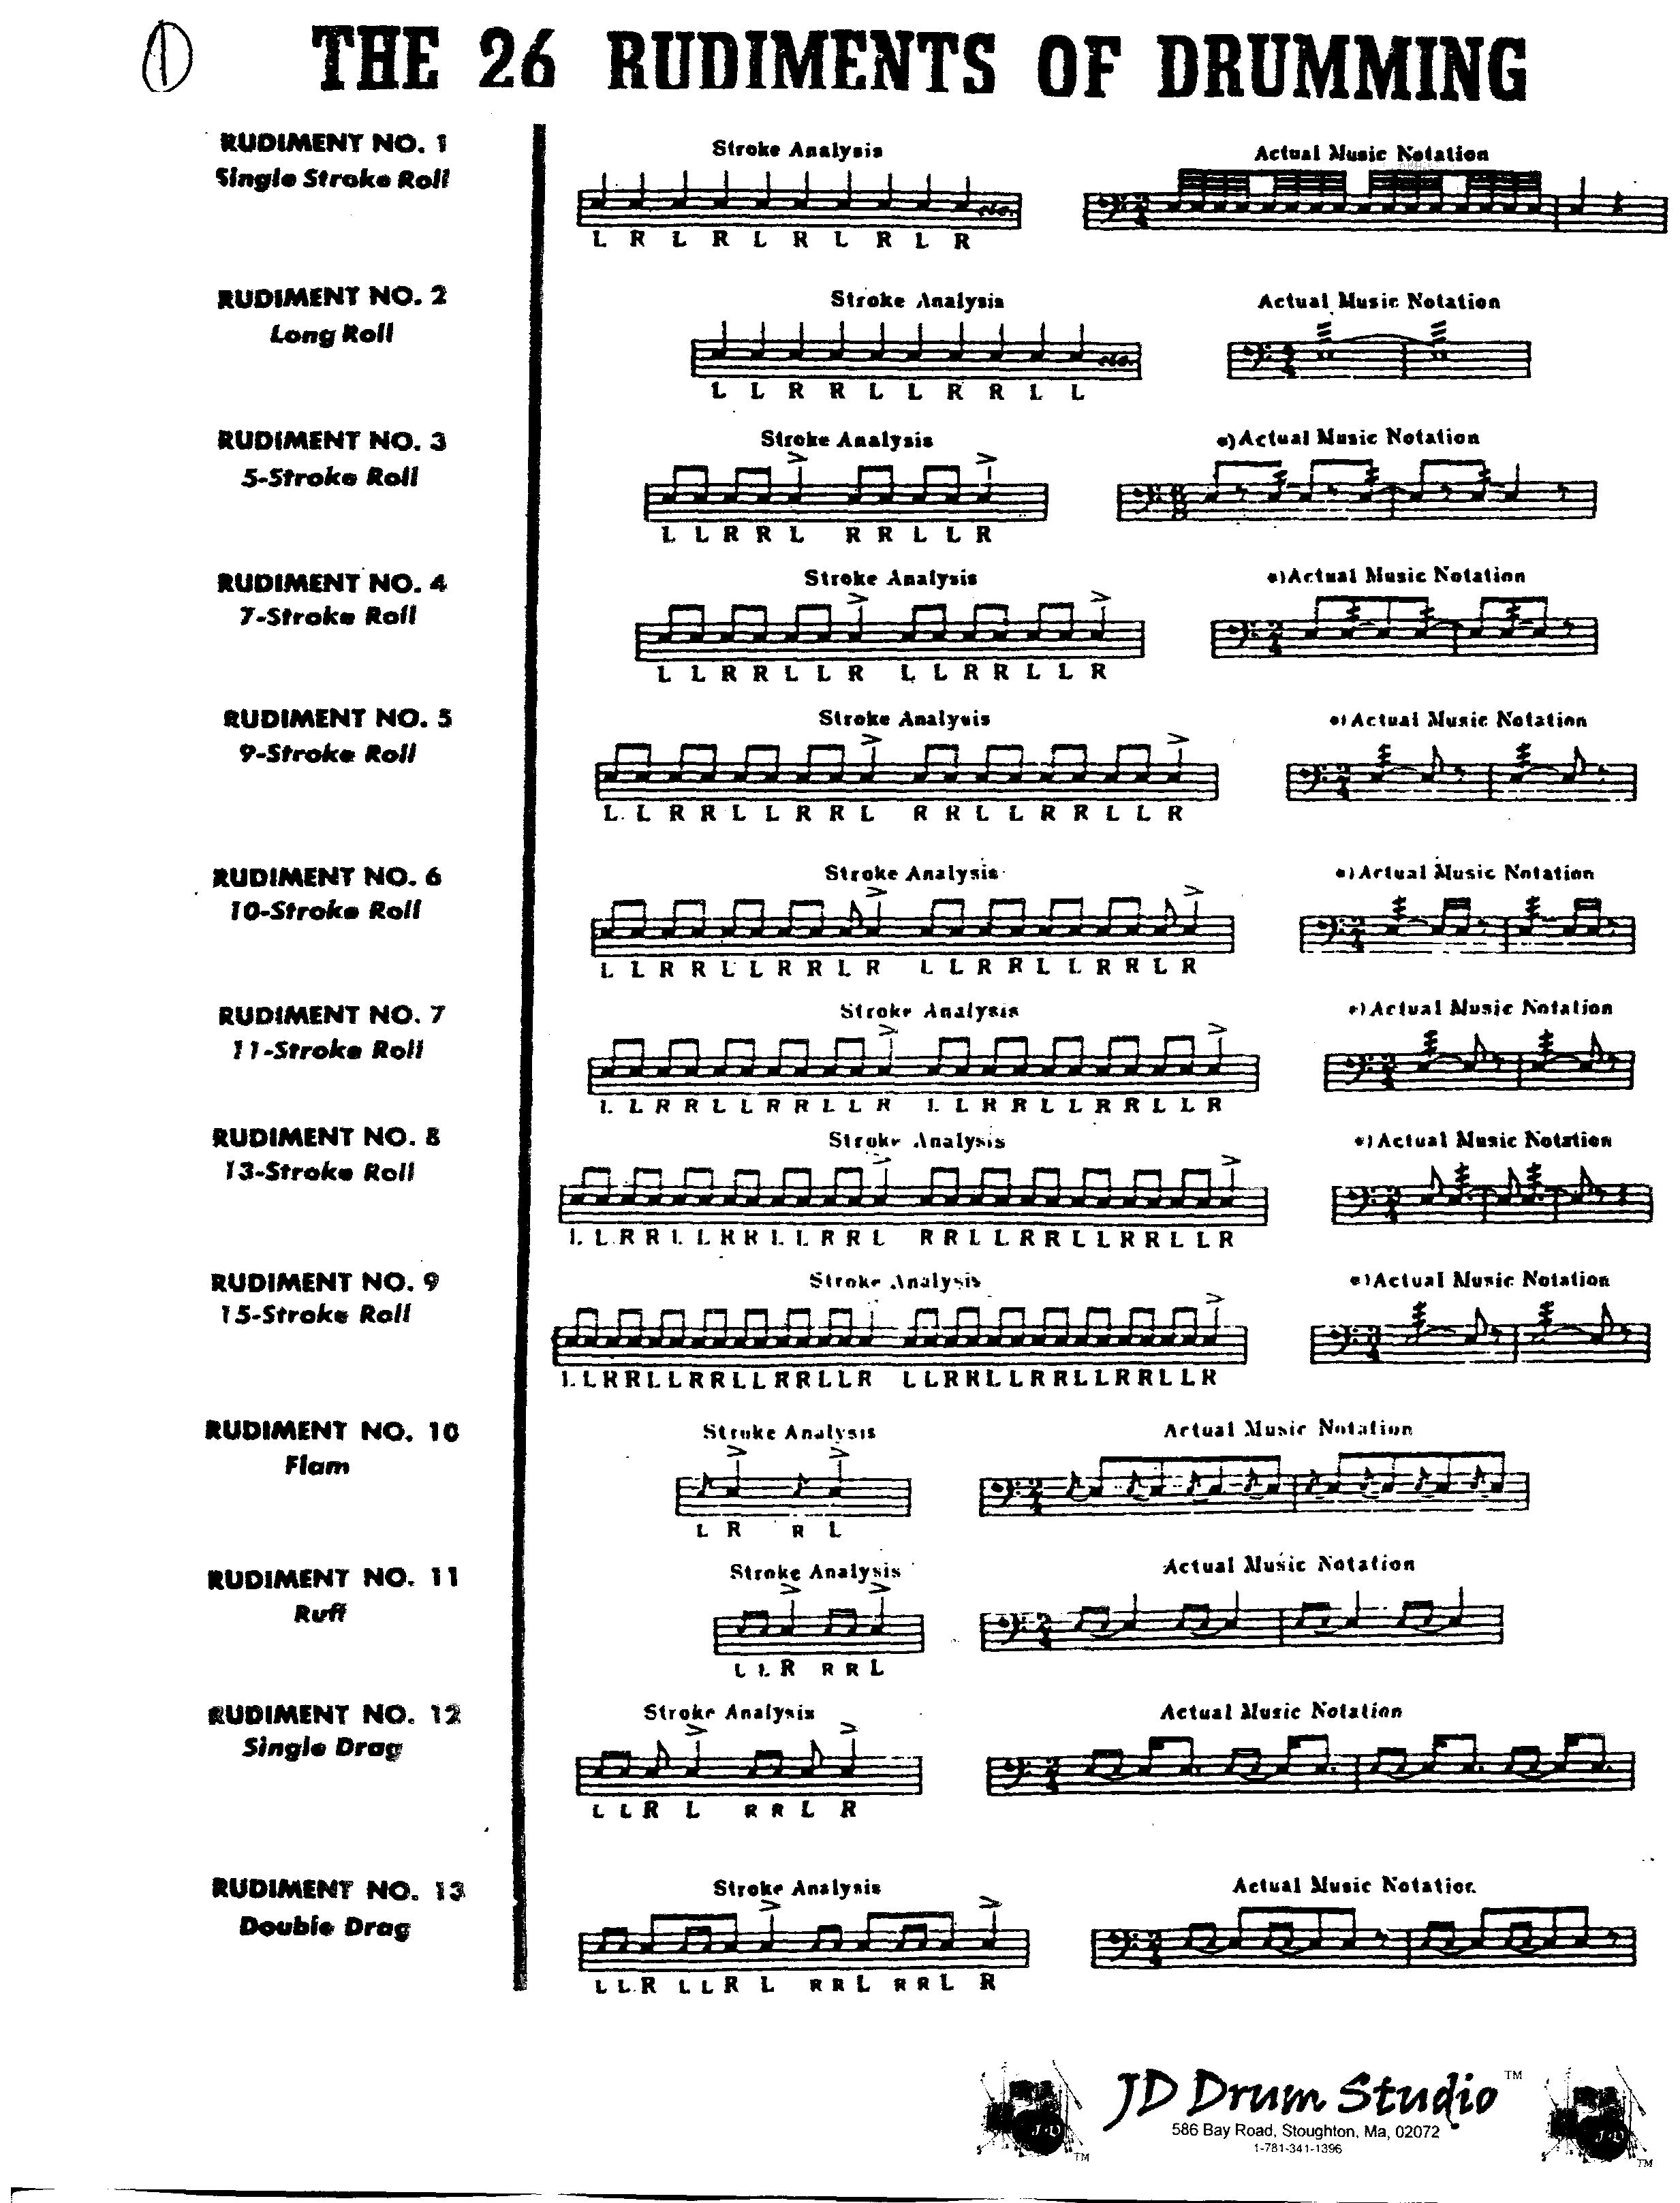 The 26 Standard American Drum Rudiments Page 1